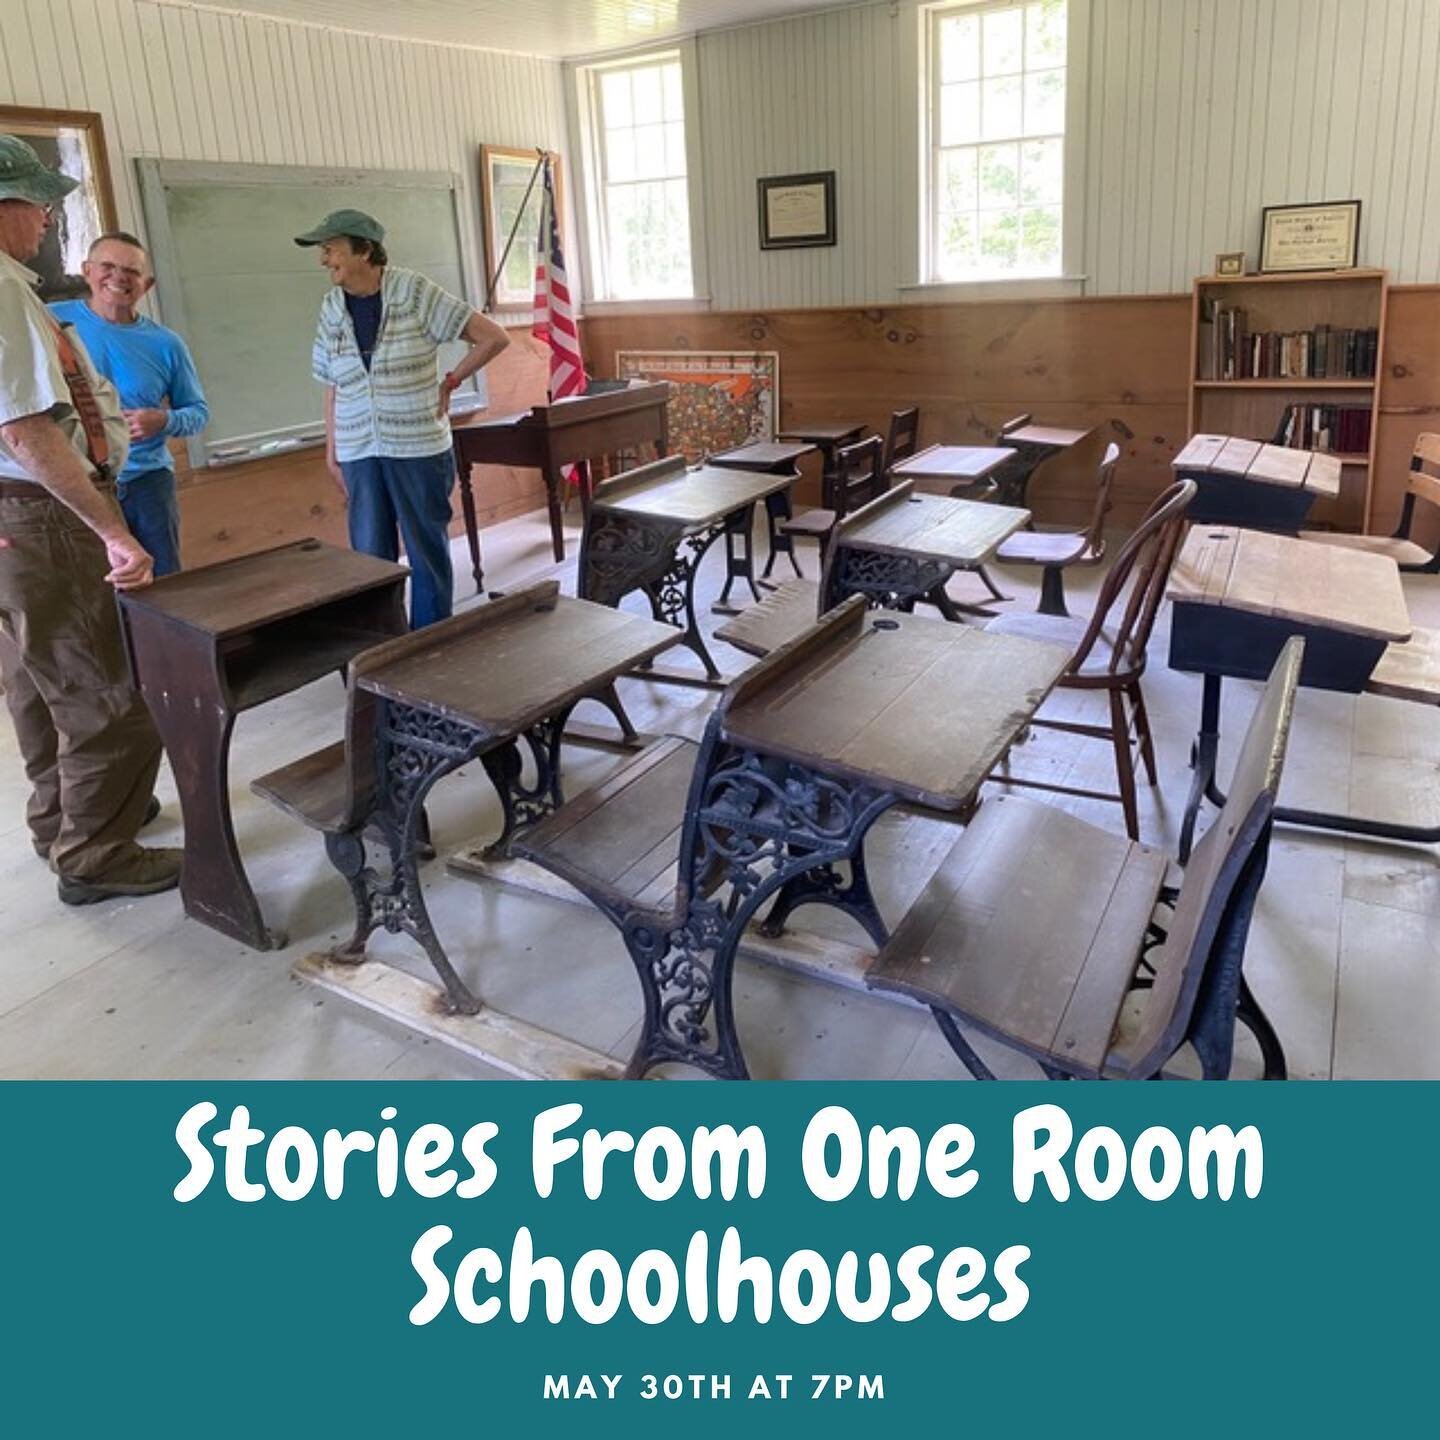 We can't wait for this event hosted by the Guilford Historical Society!

Don't miss the chance to come hear some of our revered Guilford elders talk about their experiences attending a one-room school. Starting in 1809, Guilford had 14 one-room schoo